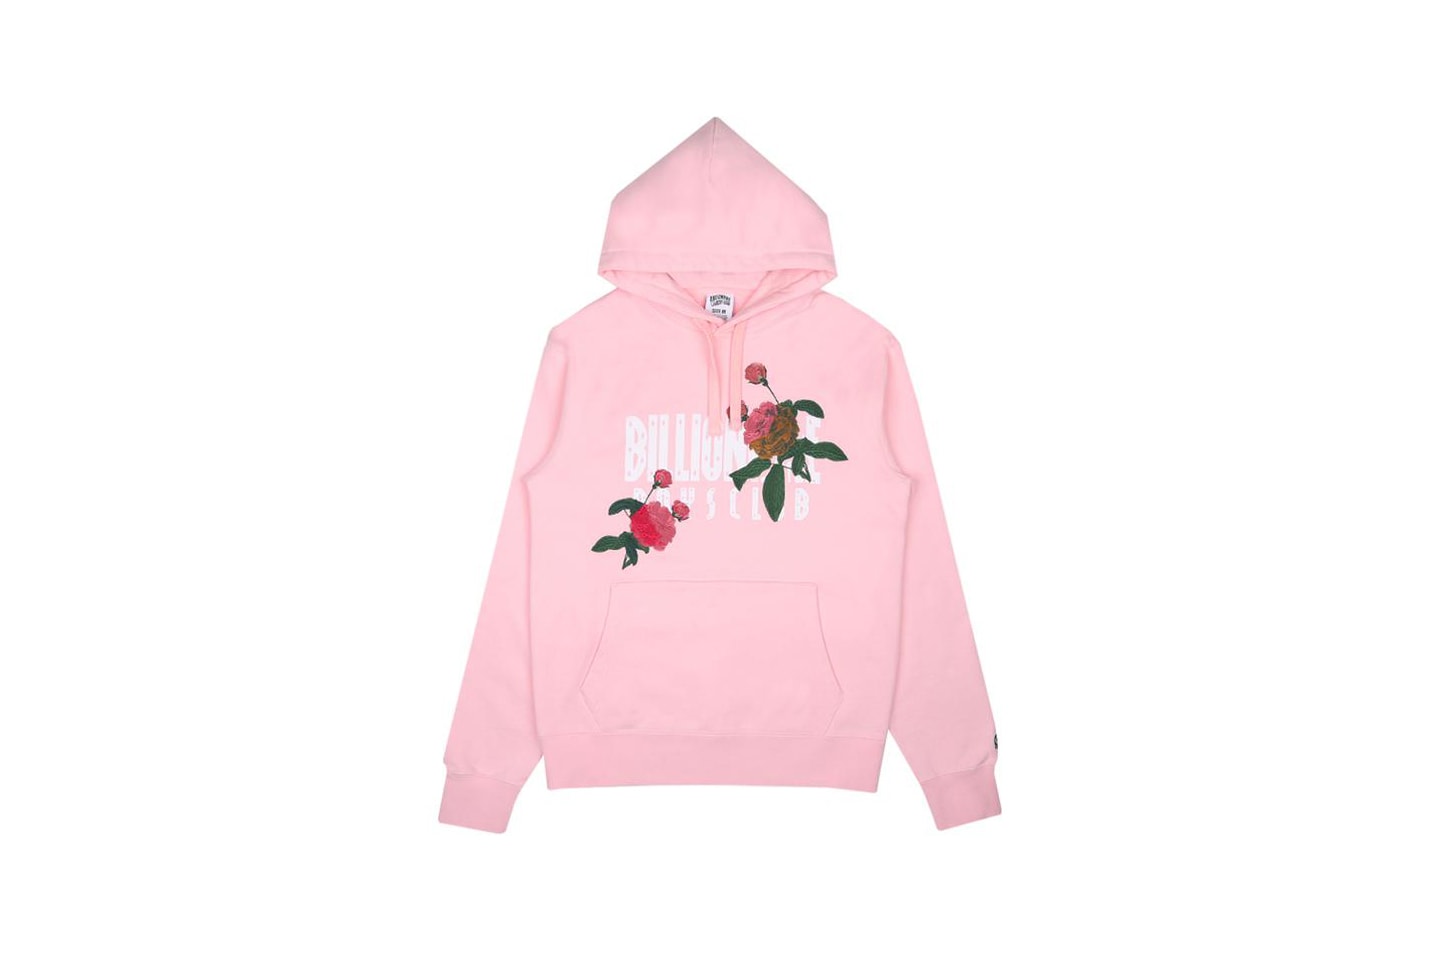 Billionaire Boys Club Spring 2018 Embroidered Floral Hoodie Pink